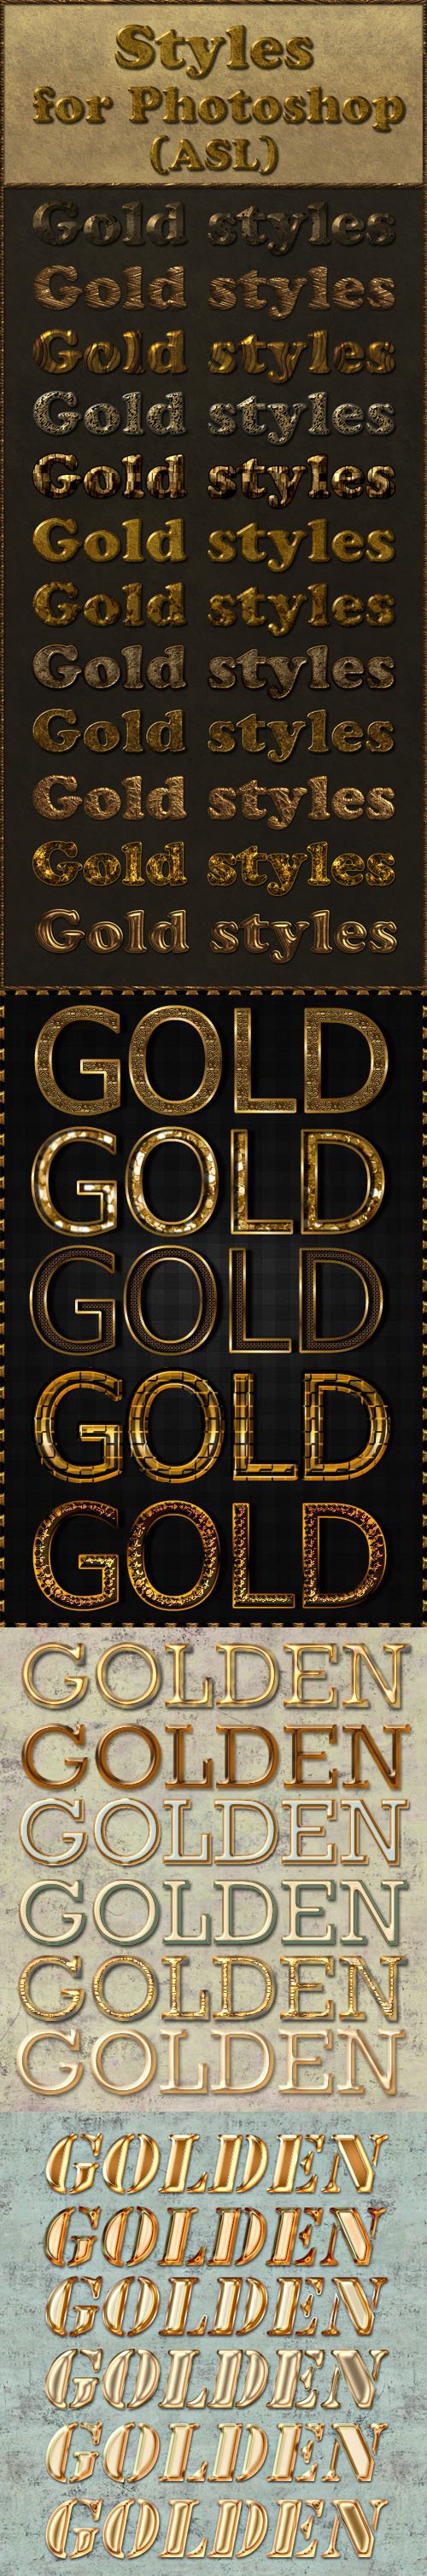 30 Gold Styles Collection for Photoshop